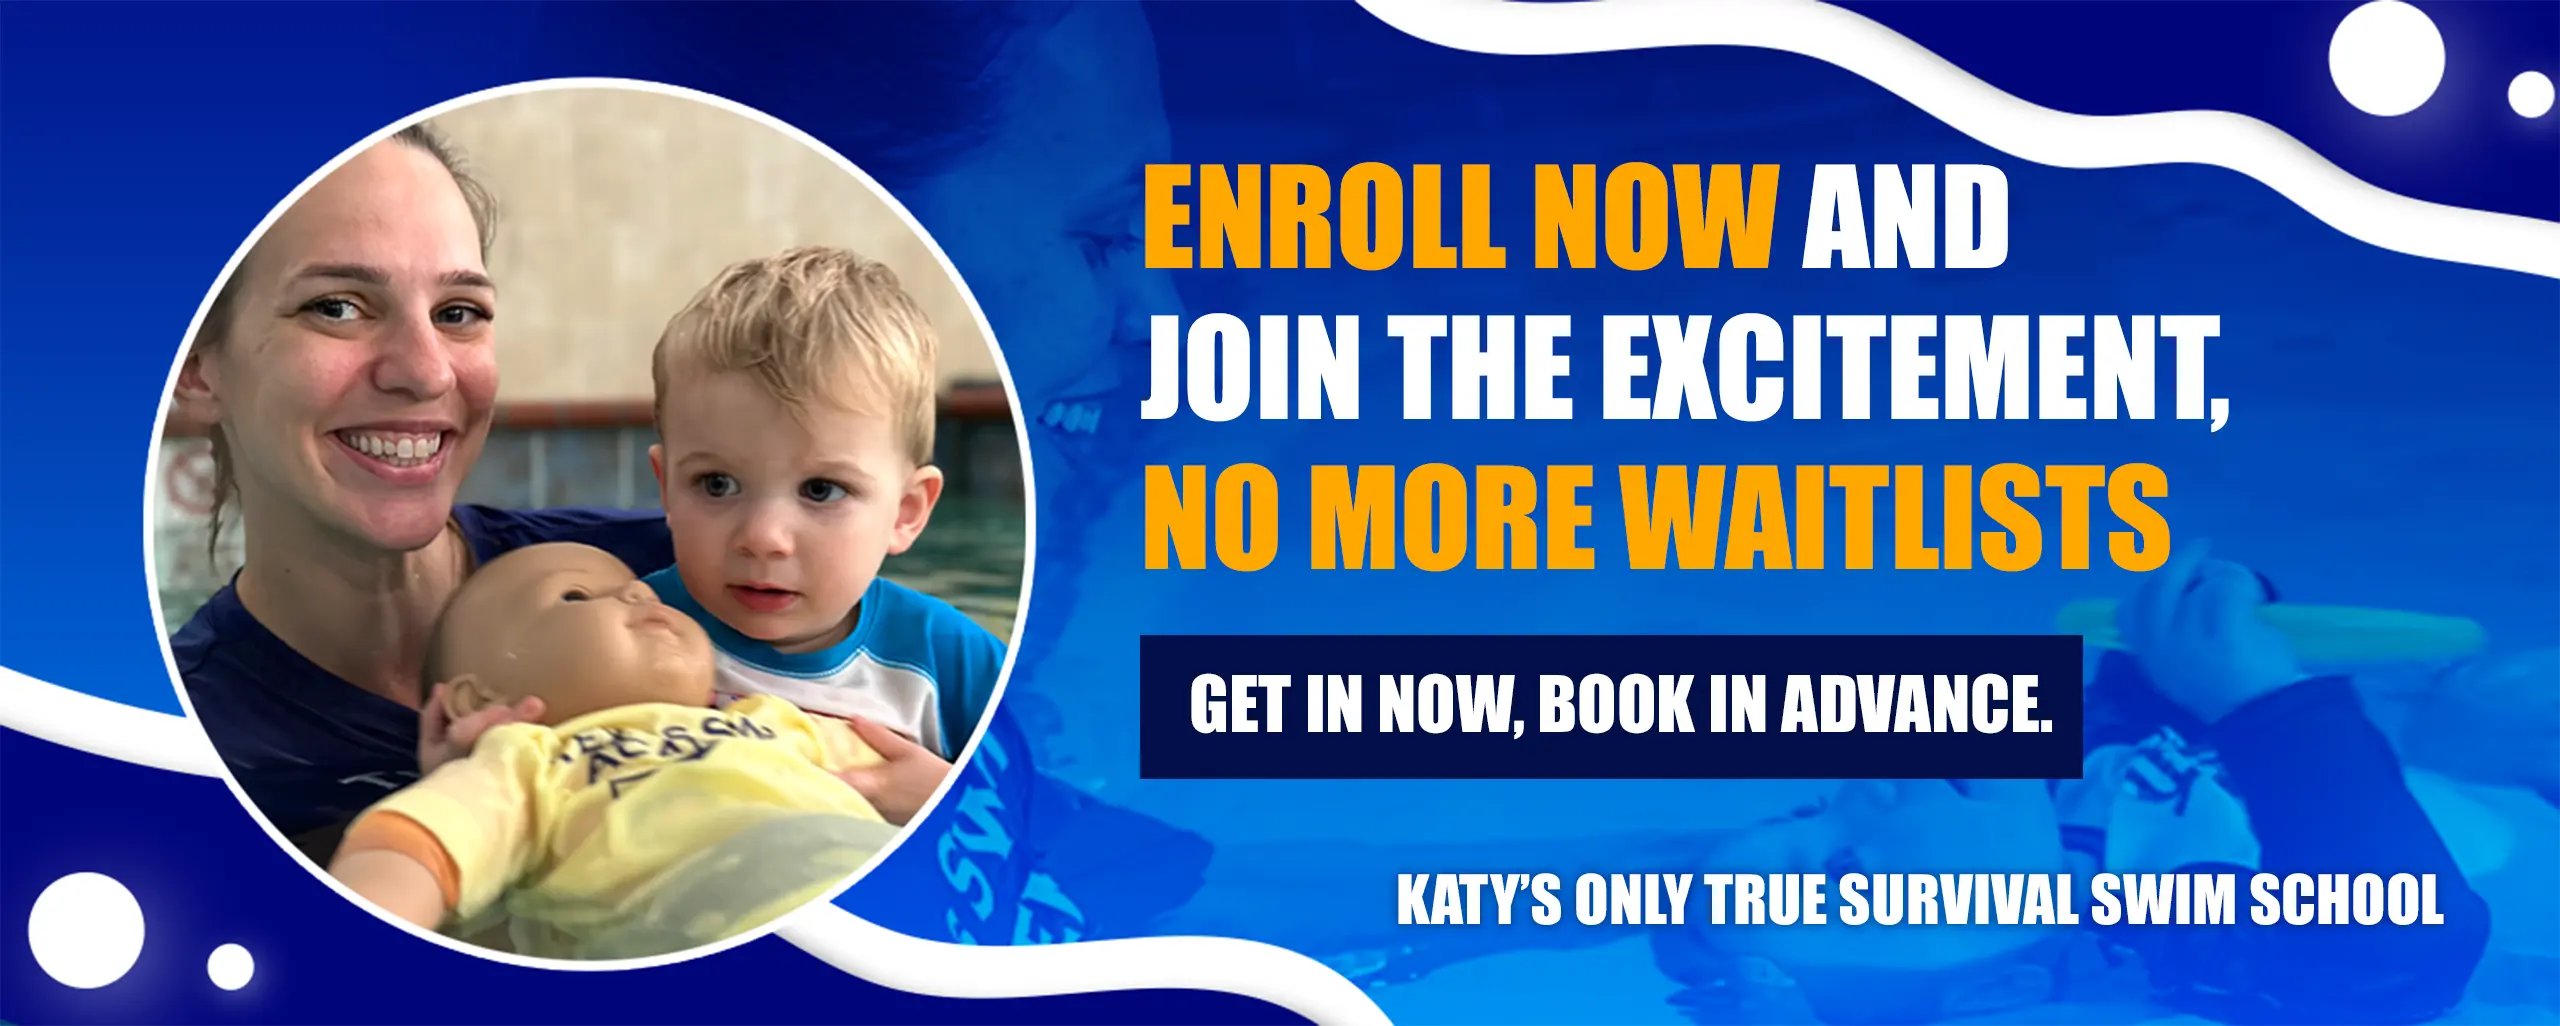 Enroll Now and Join the Excitement, No More Waitlists